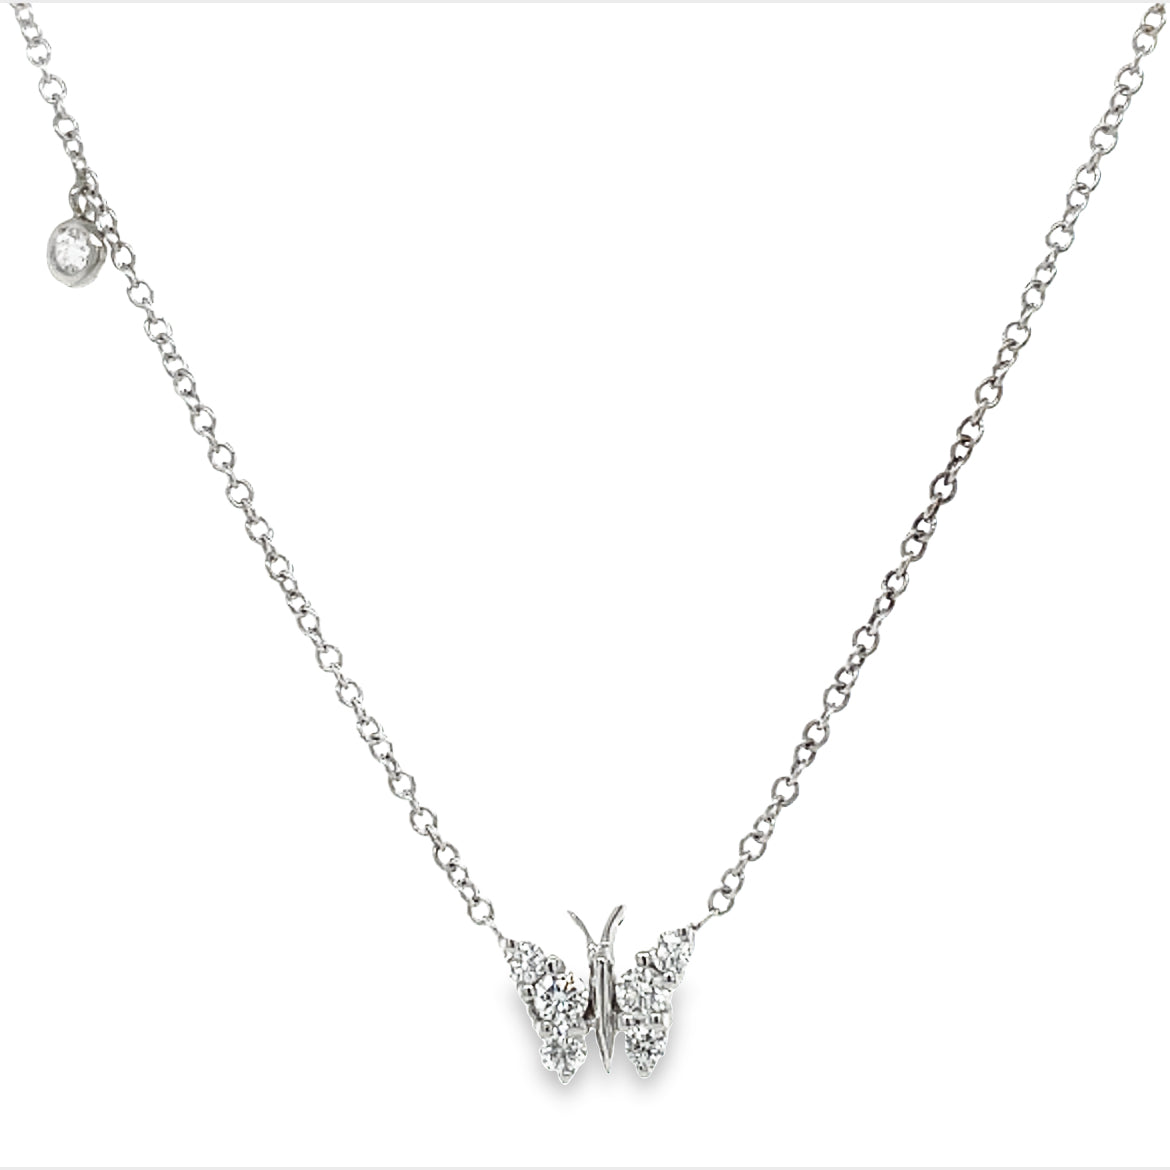 Crafted in Italy, this dazzling Diamond Butterfly Necklace shimmers with round diamonds weighing 0.31 cts, set in 18 kt white gold. Captivating at 11.00 x 9.00 mm, it boasts a secure lobster clasp and measures 16.5" long with a sizing loop.